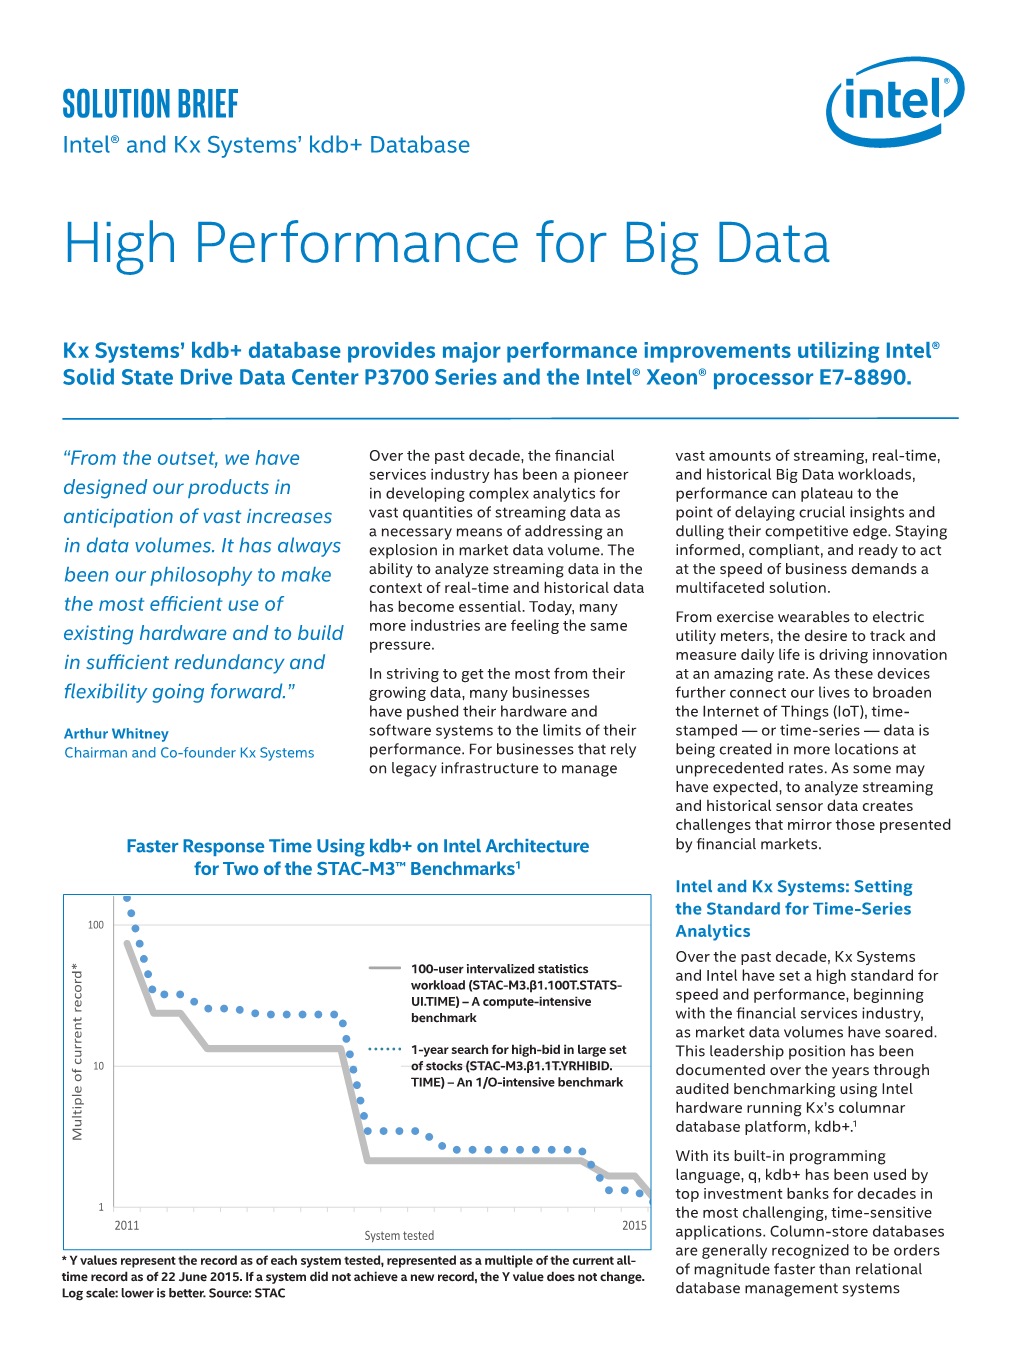 KX Systems' Kdb+* High Performance Data Base for Business